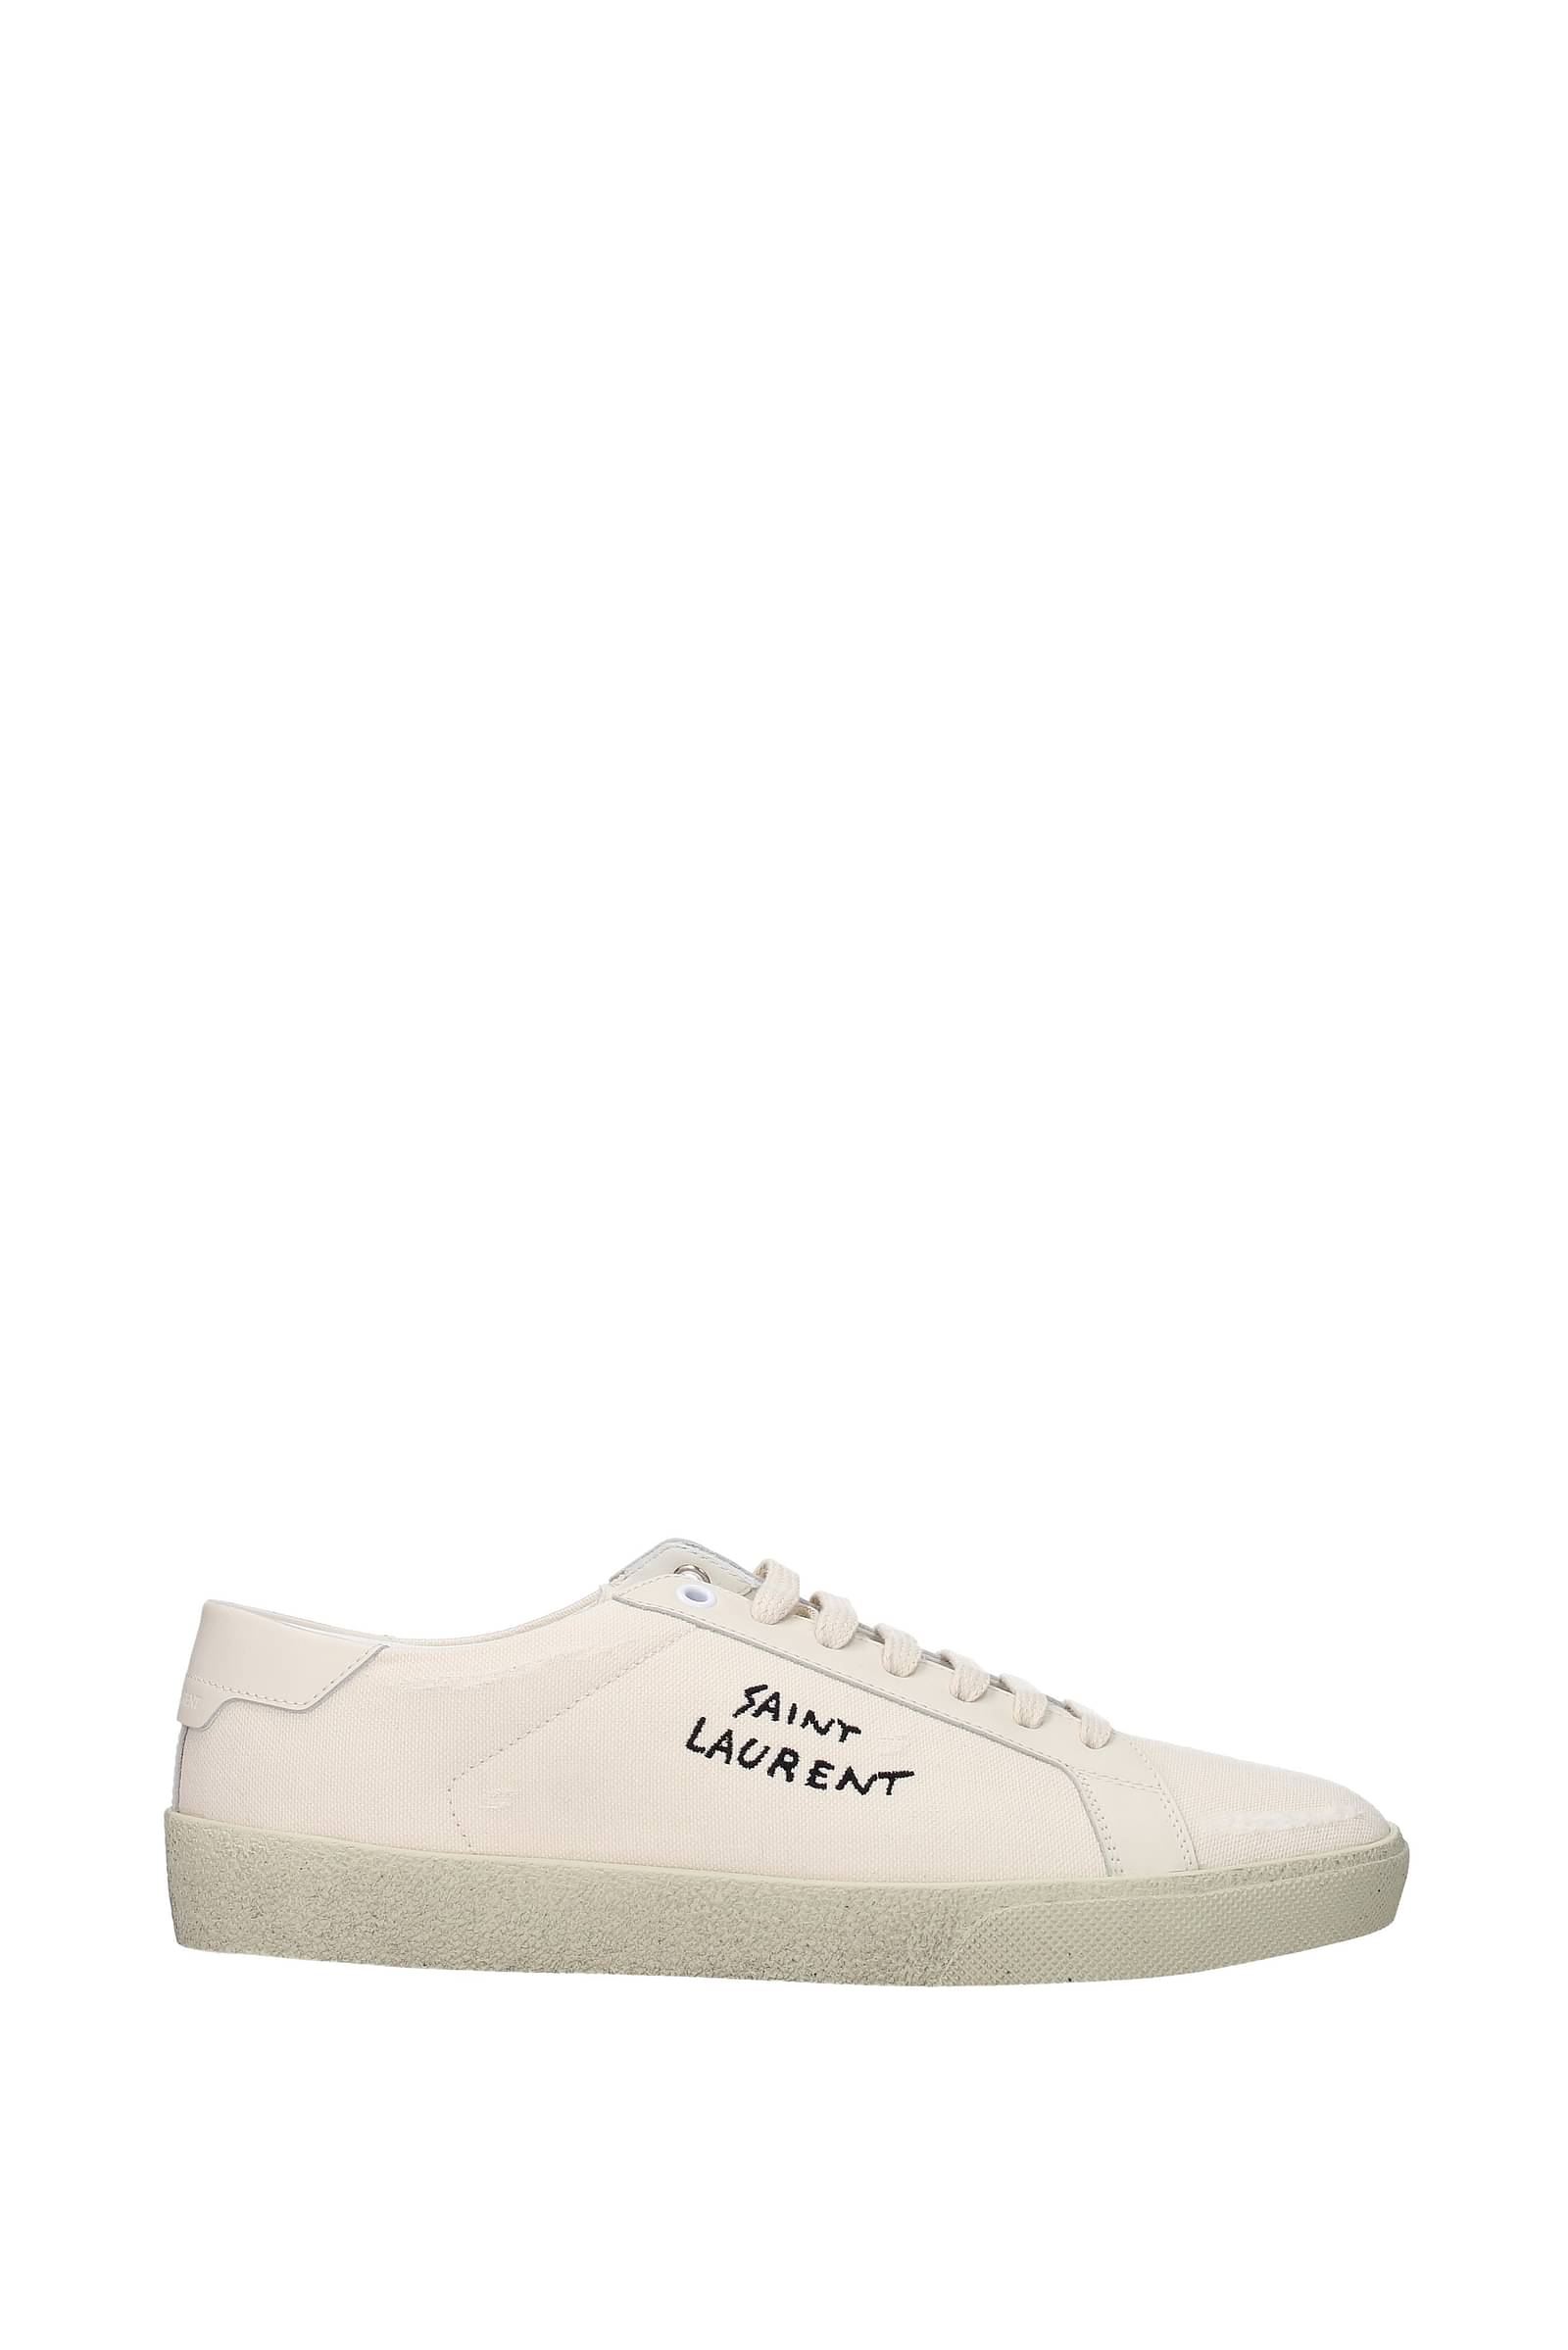 SAINT LAURENT: Court Classic SL / 06 sneakers in canvas and leather - Black  | Saint Laurent sneakers 611106 GUP50 online at GIGLIO.COM